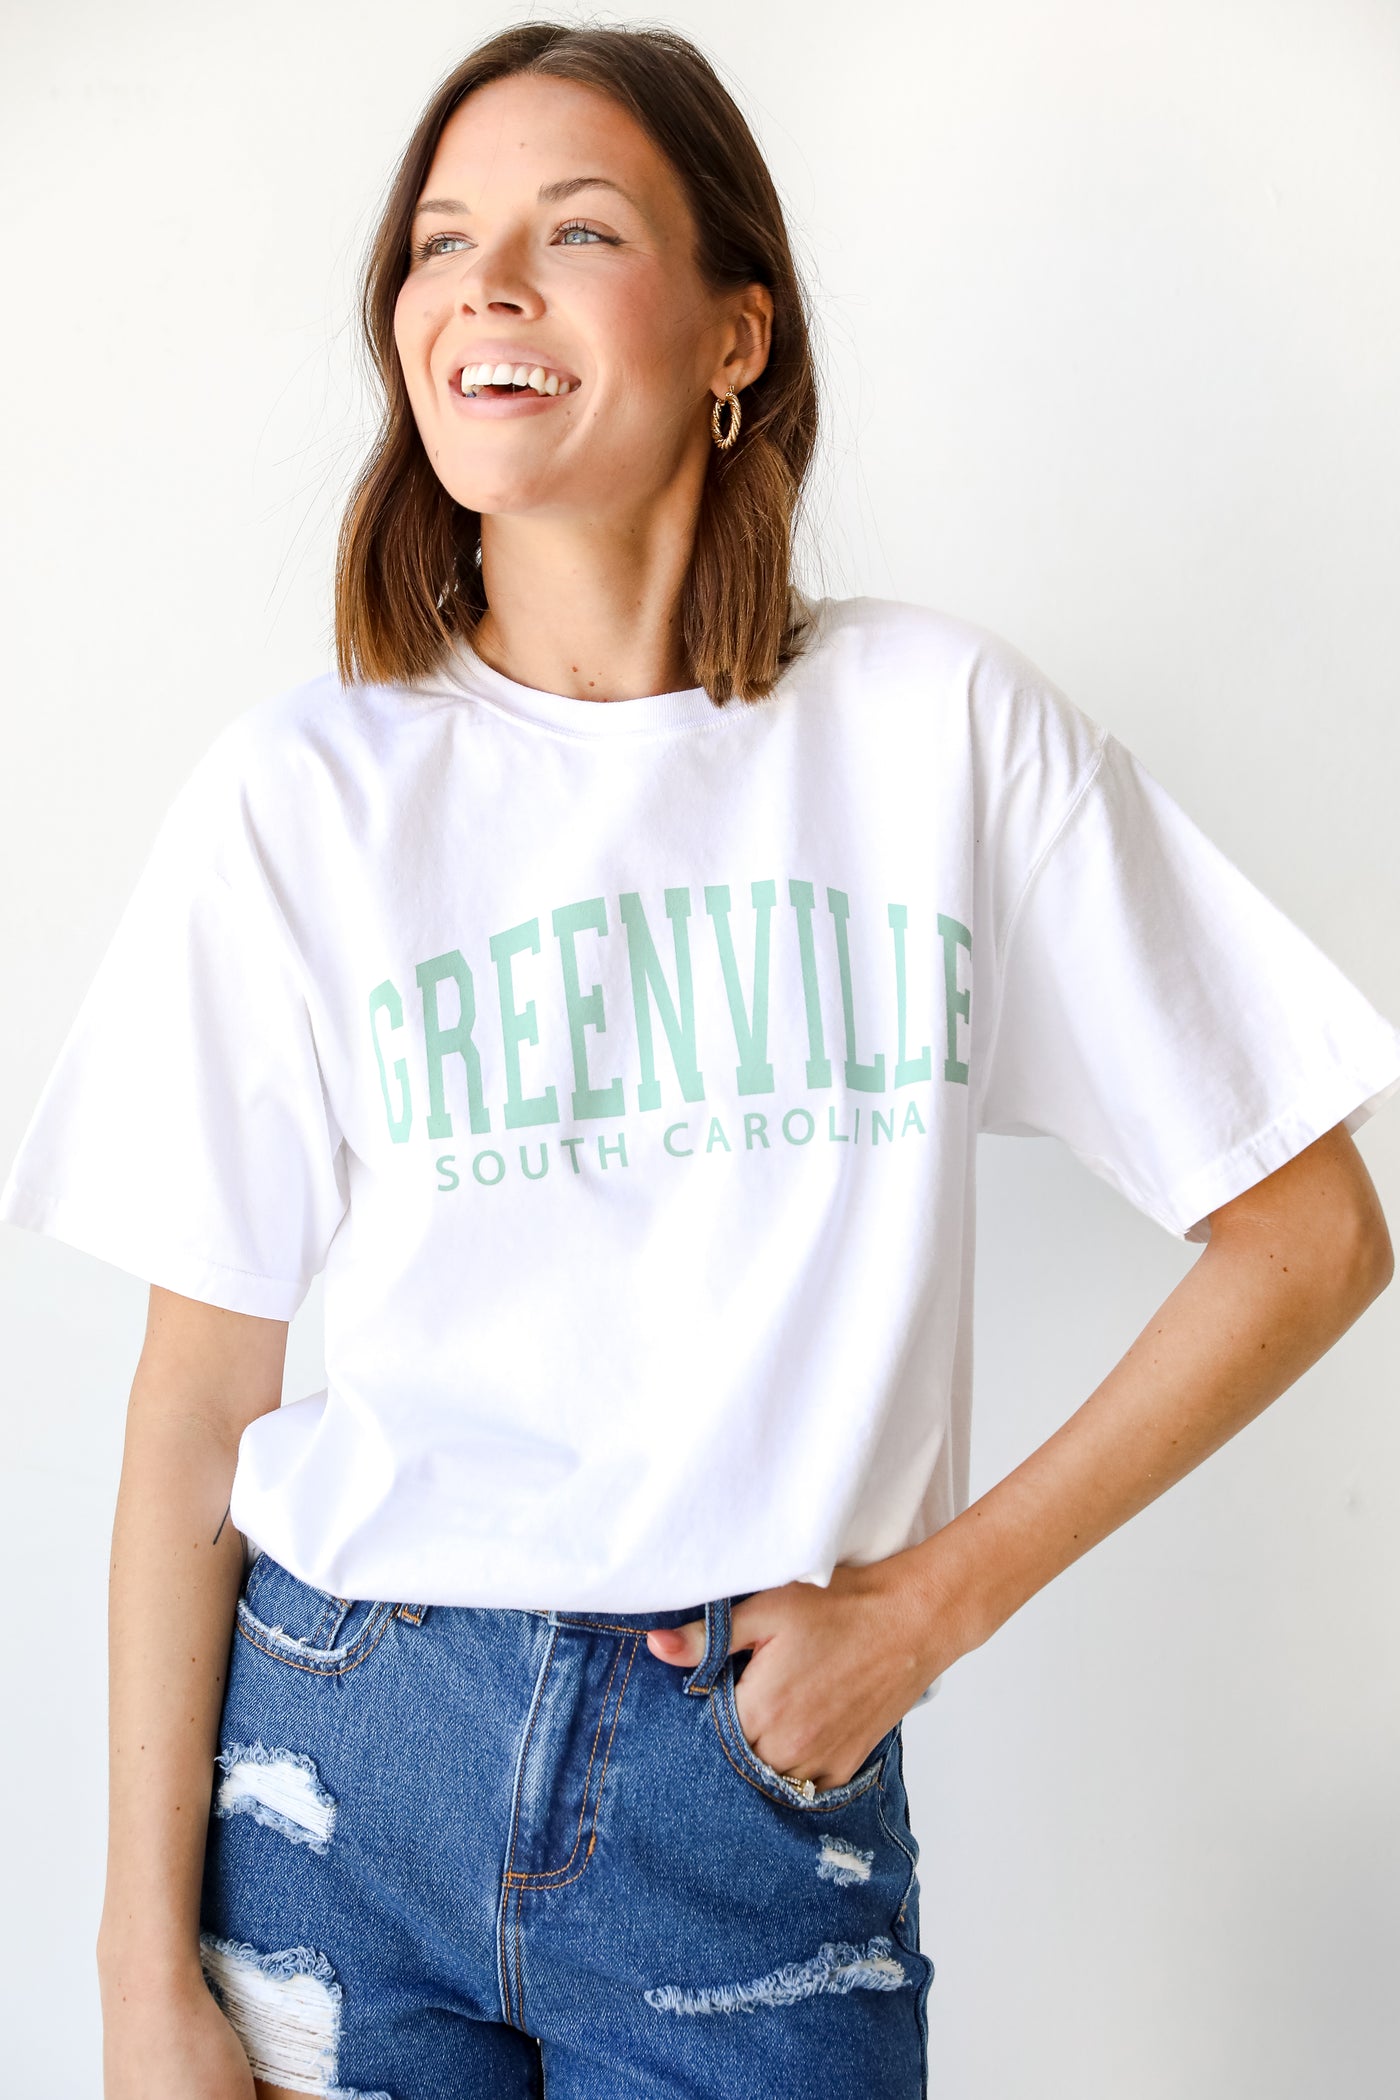 White Greenville South Carolina Tee from dress up